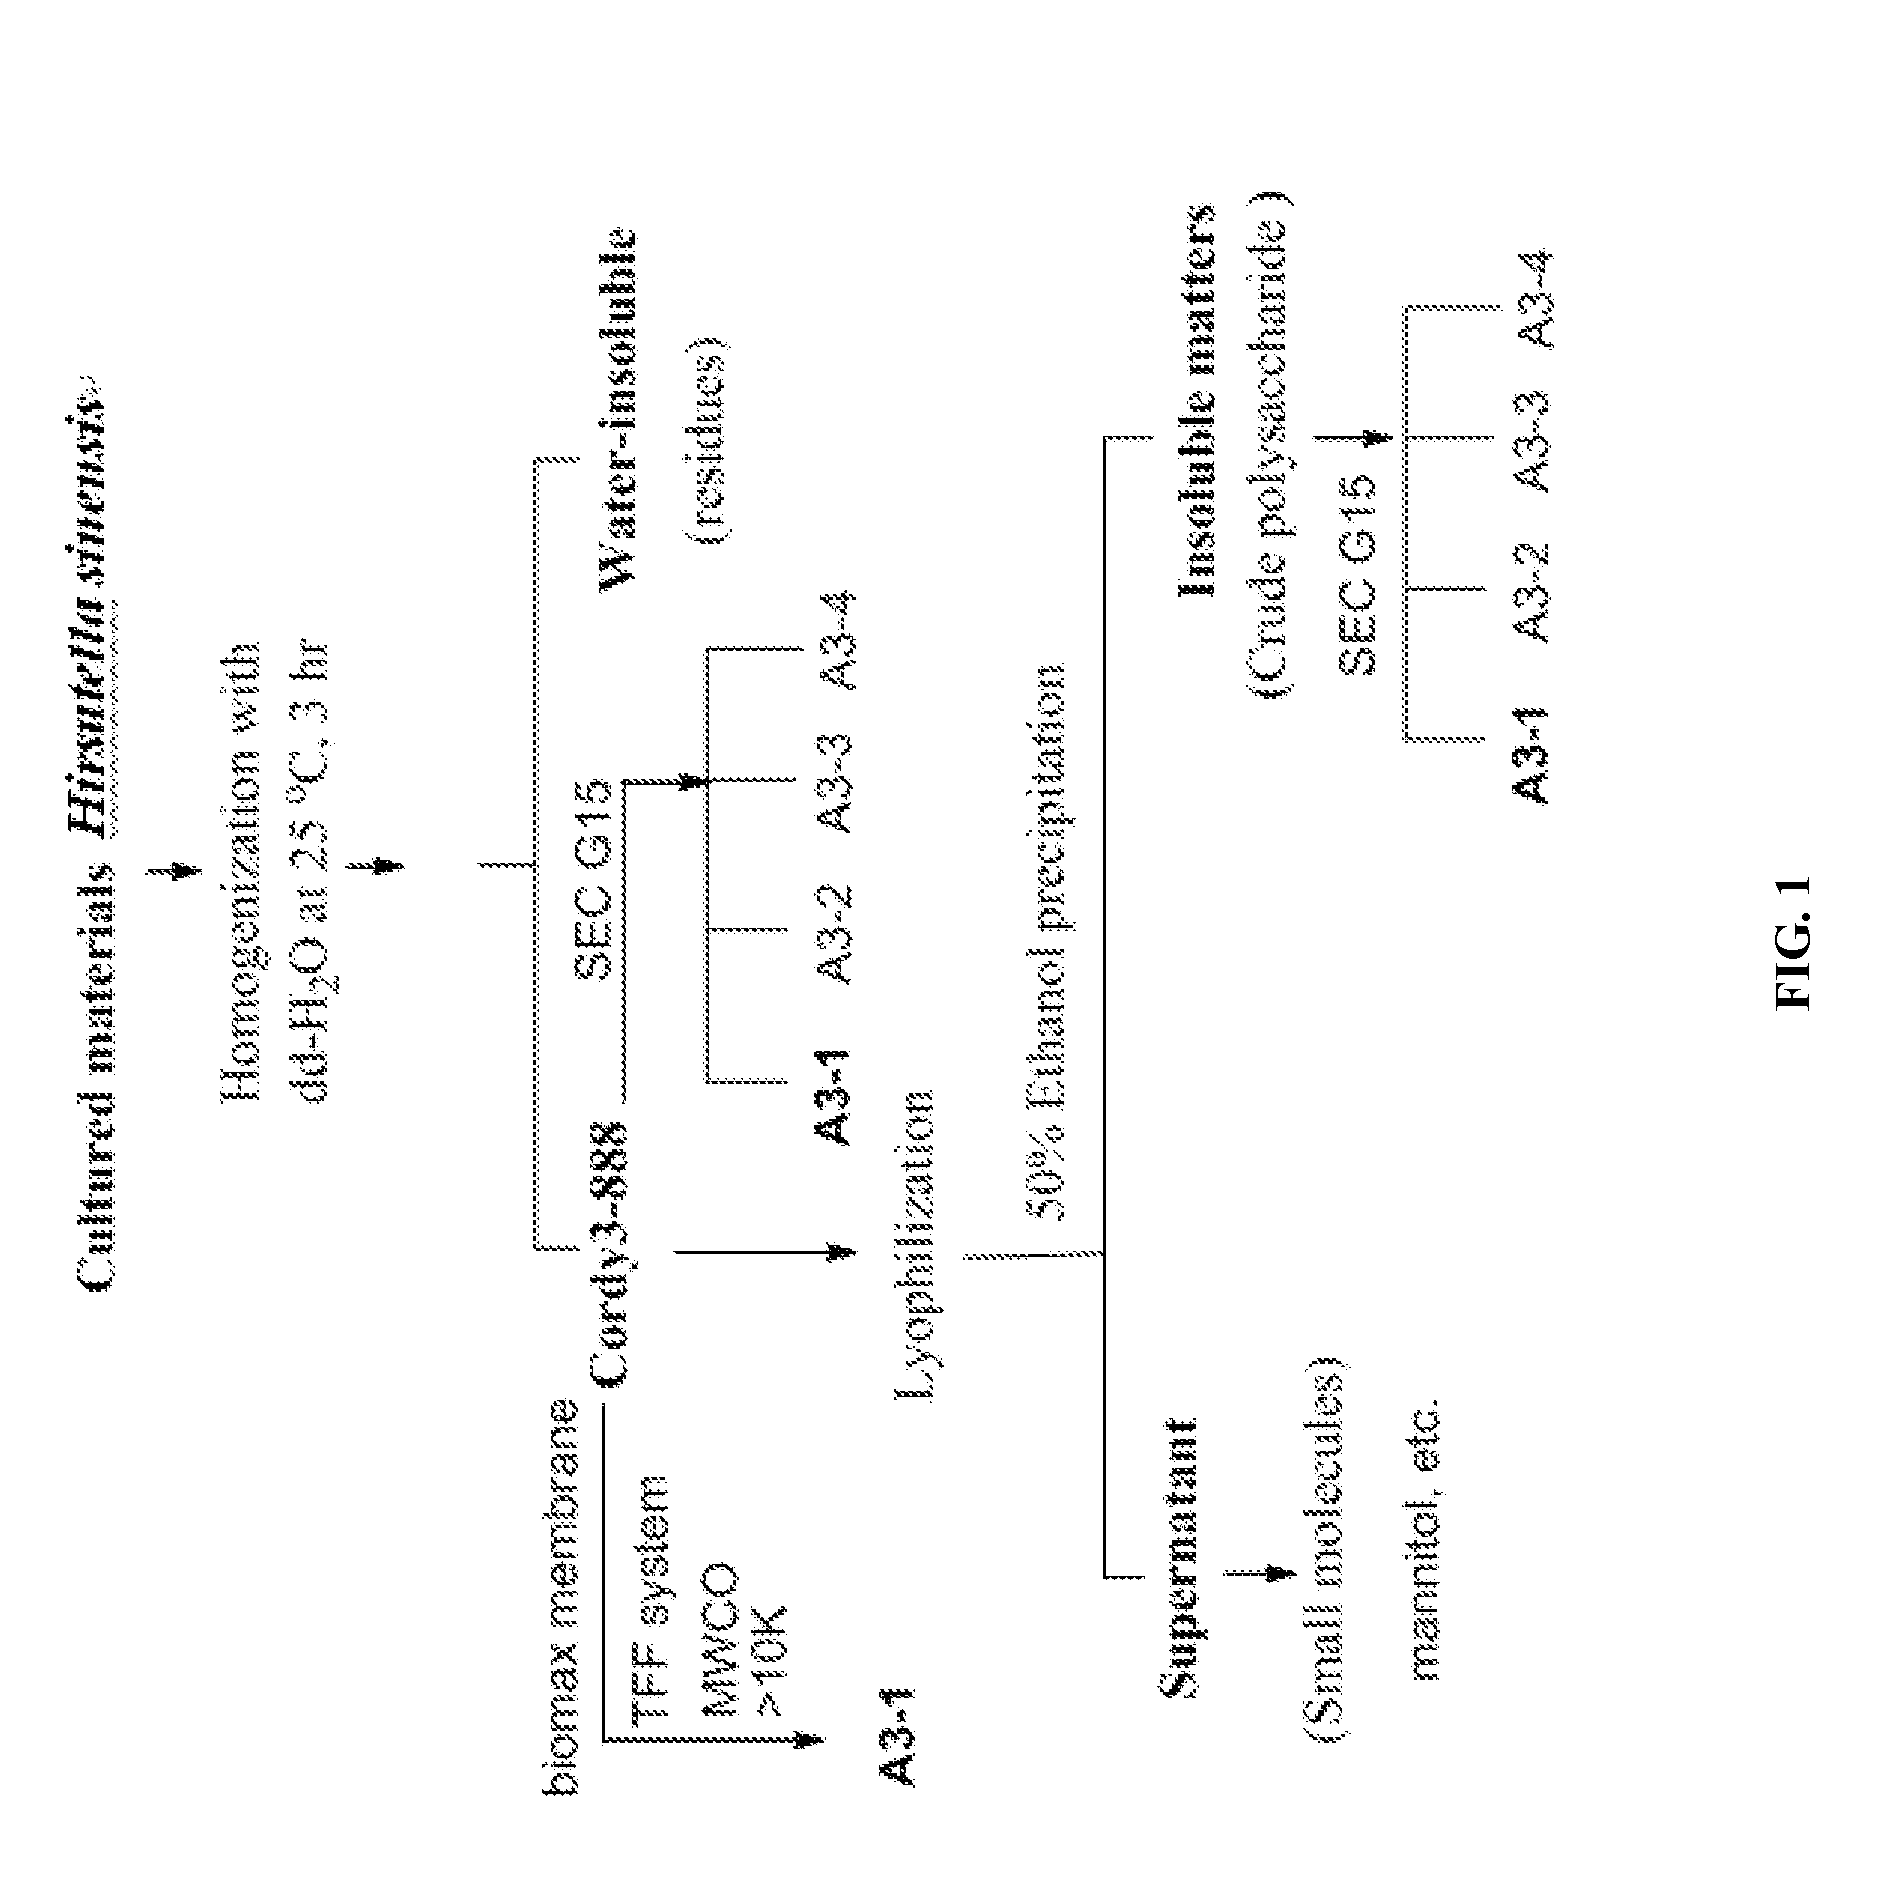 Hirsutella sinensis mycelia compositions and methods for treating sepsis and related inflammatory responses